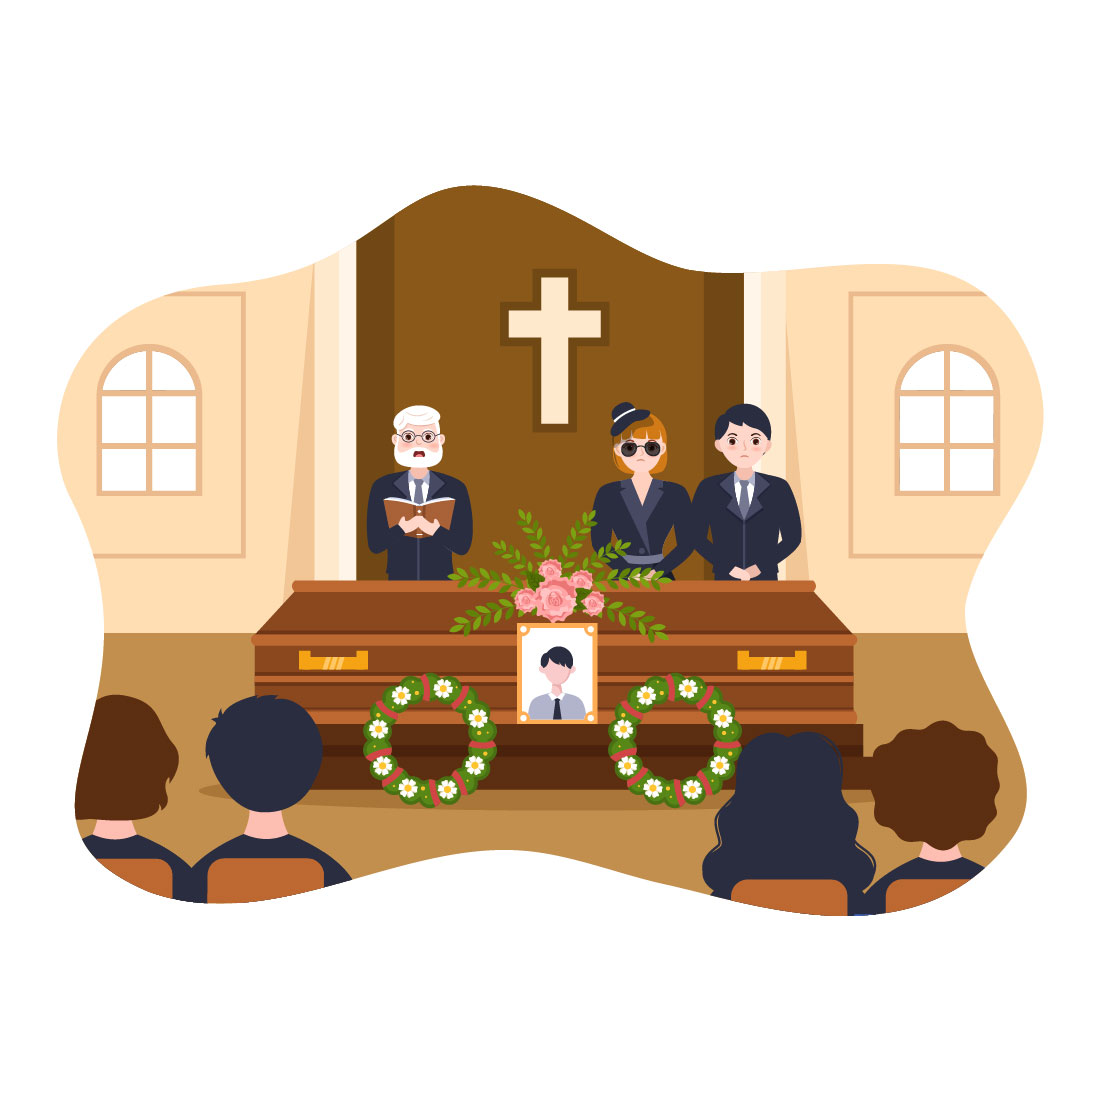 Amazing cartoon image of a funeral ceremony.